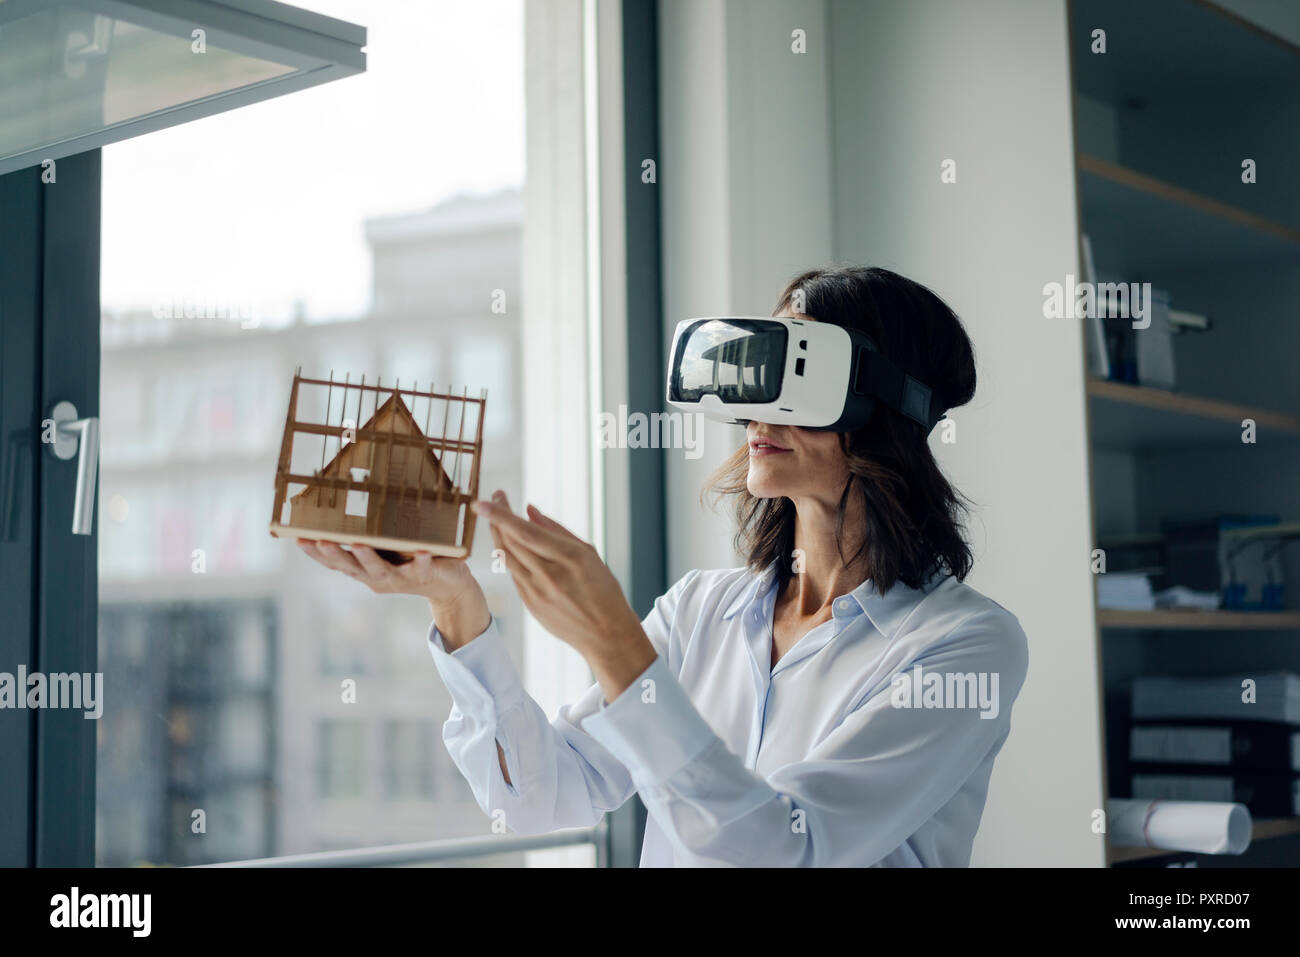 Woman holding architectural model of house, using VR glasses Stock Photo